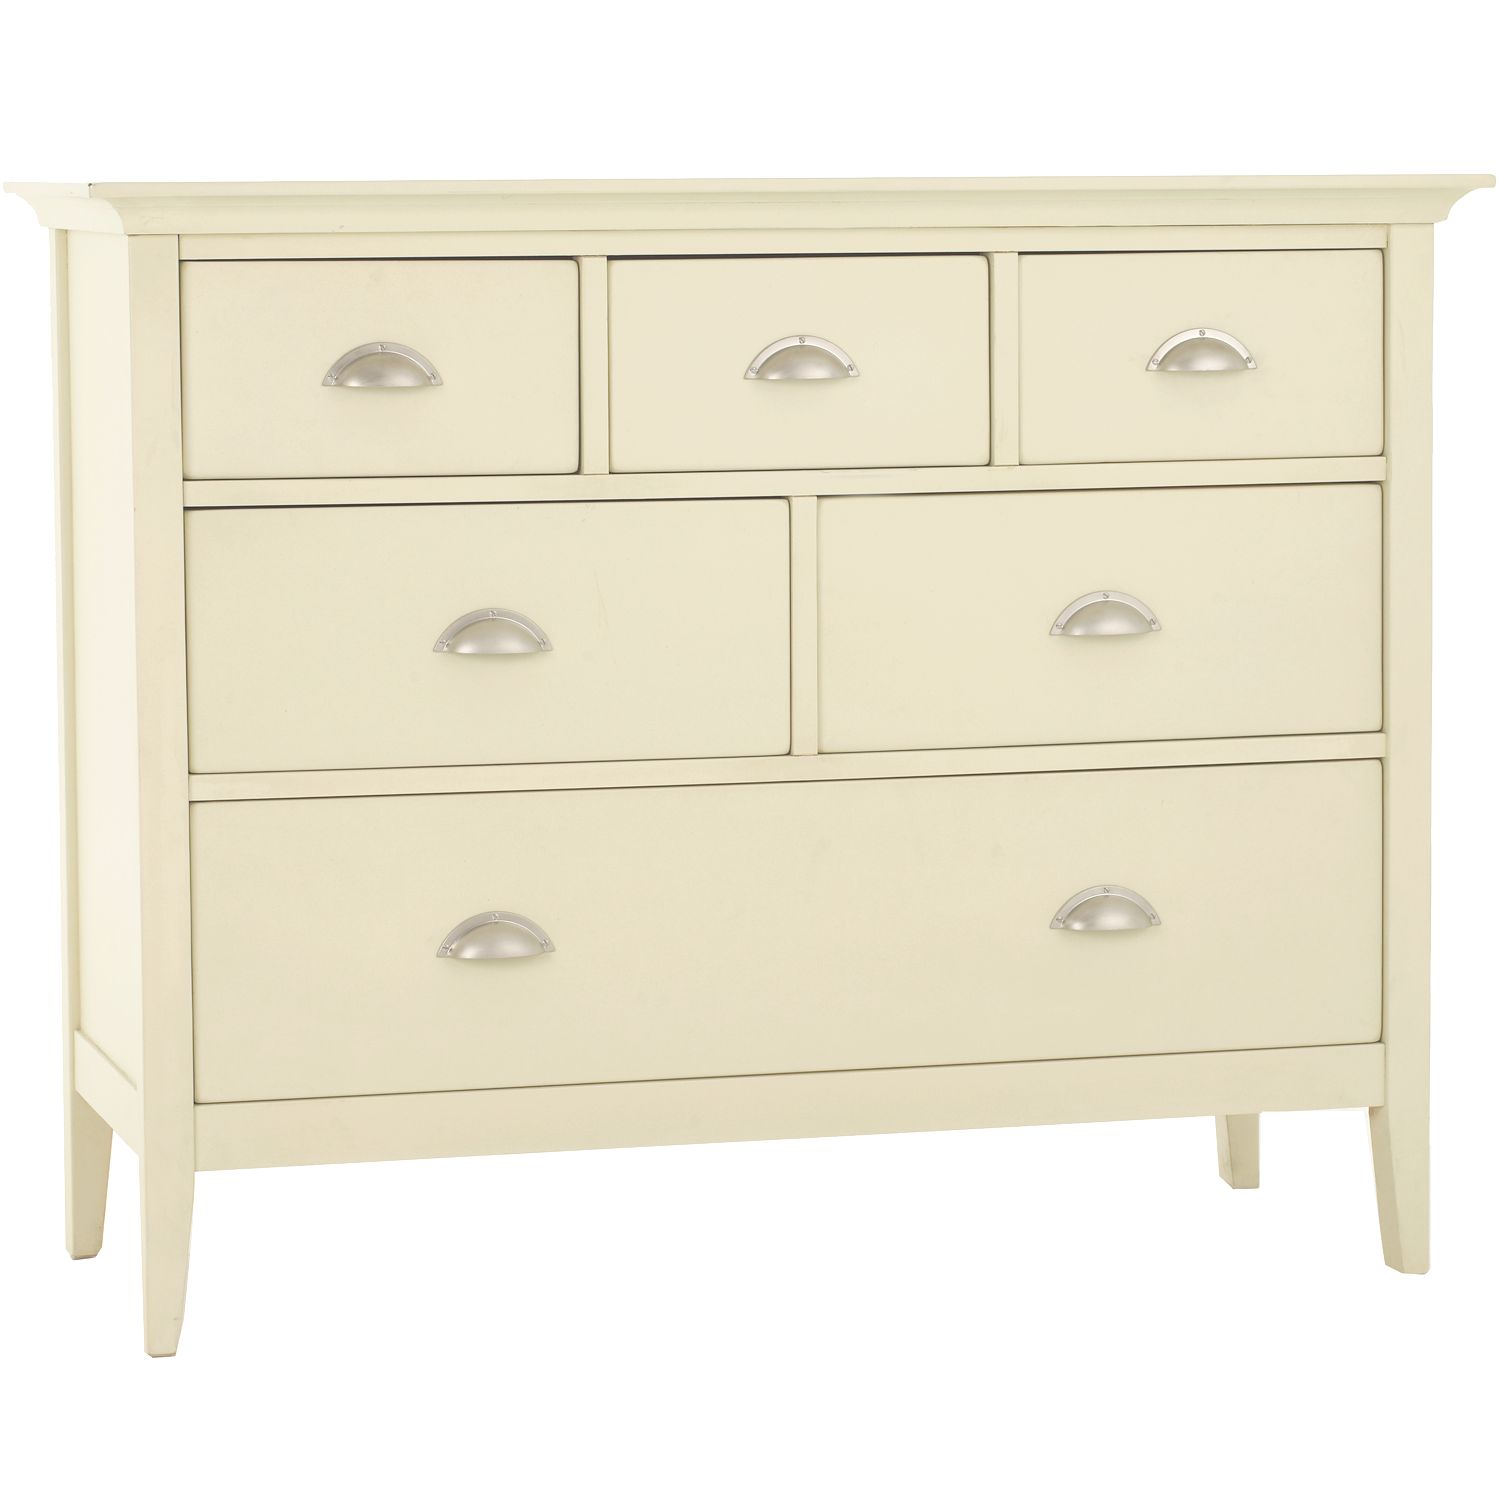 John Lewis New England Low 6 Drawer Chest